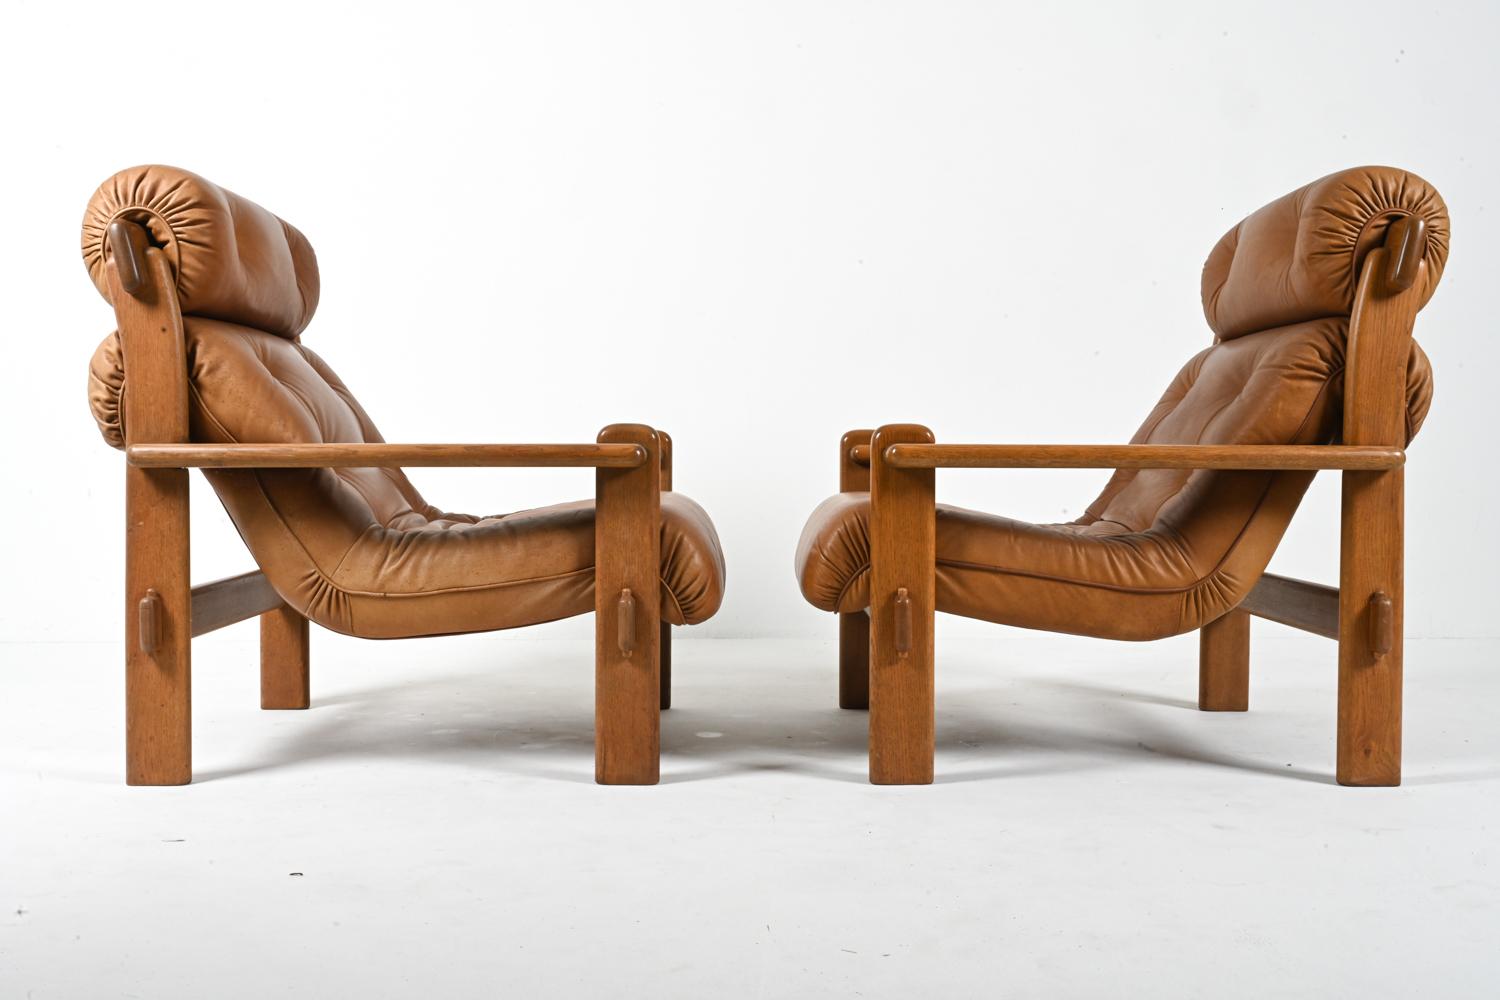 Pair of European Brutalist Armchairs in Oak & Leather, c. 1970's For Sale 13